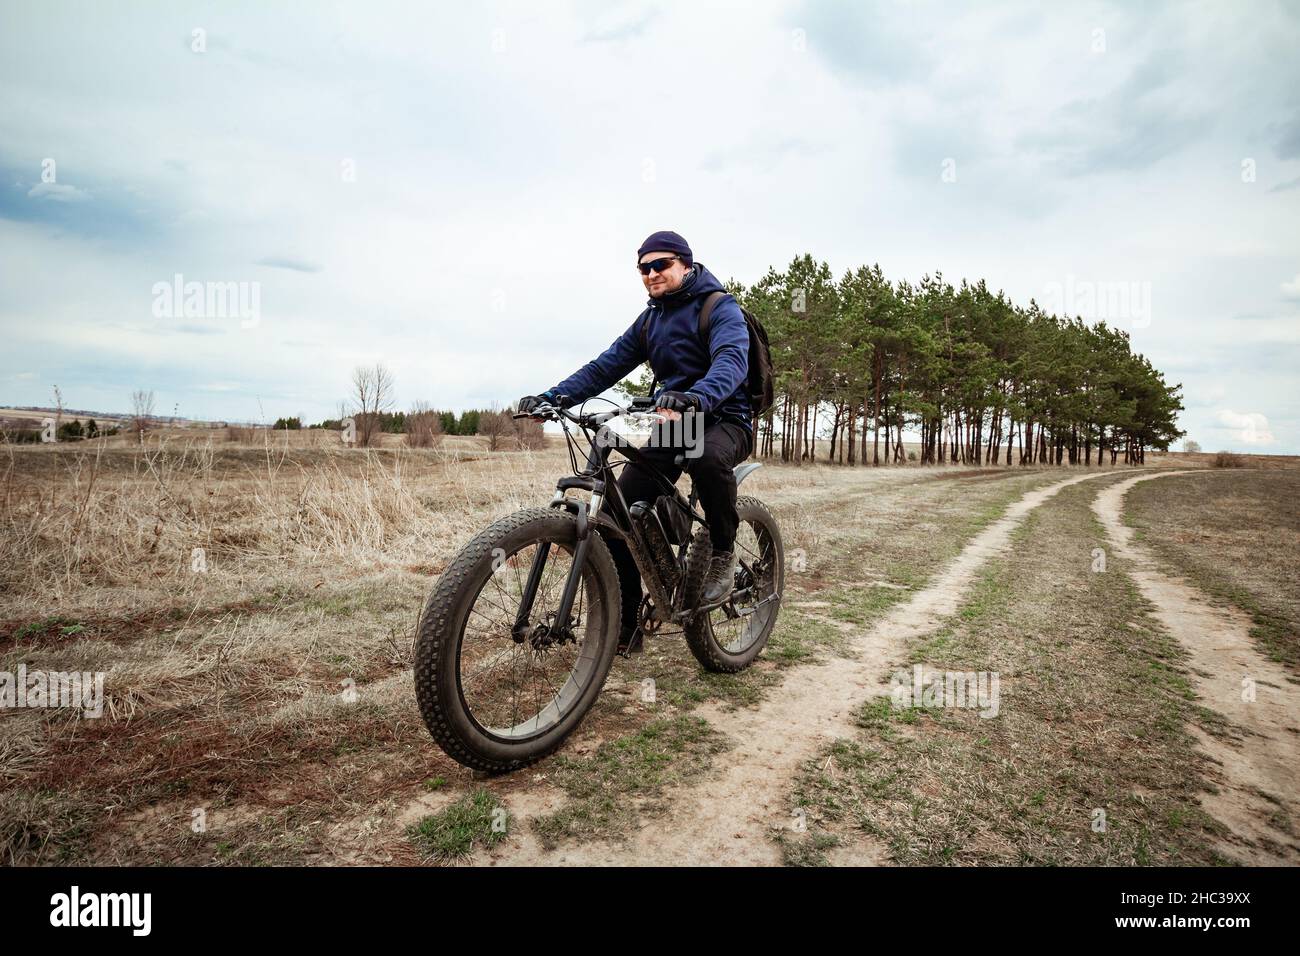 A man rides a fat bike on the road. Rural area. Stock Photo